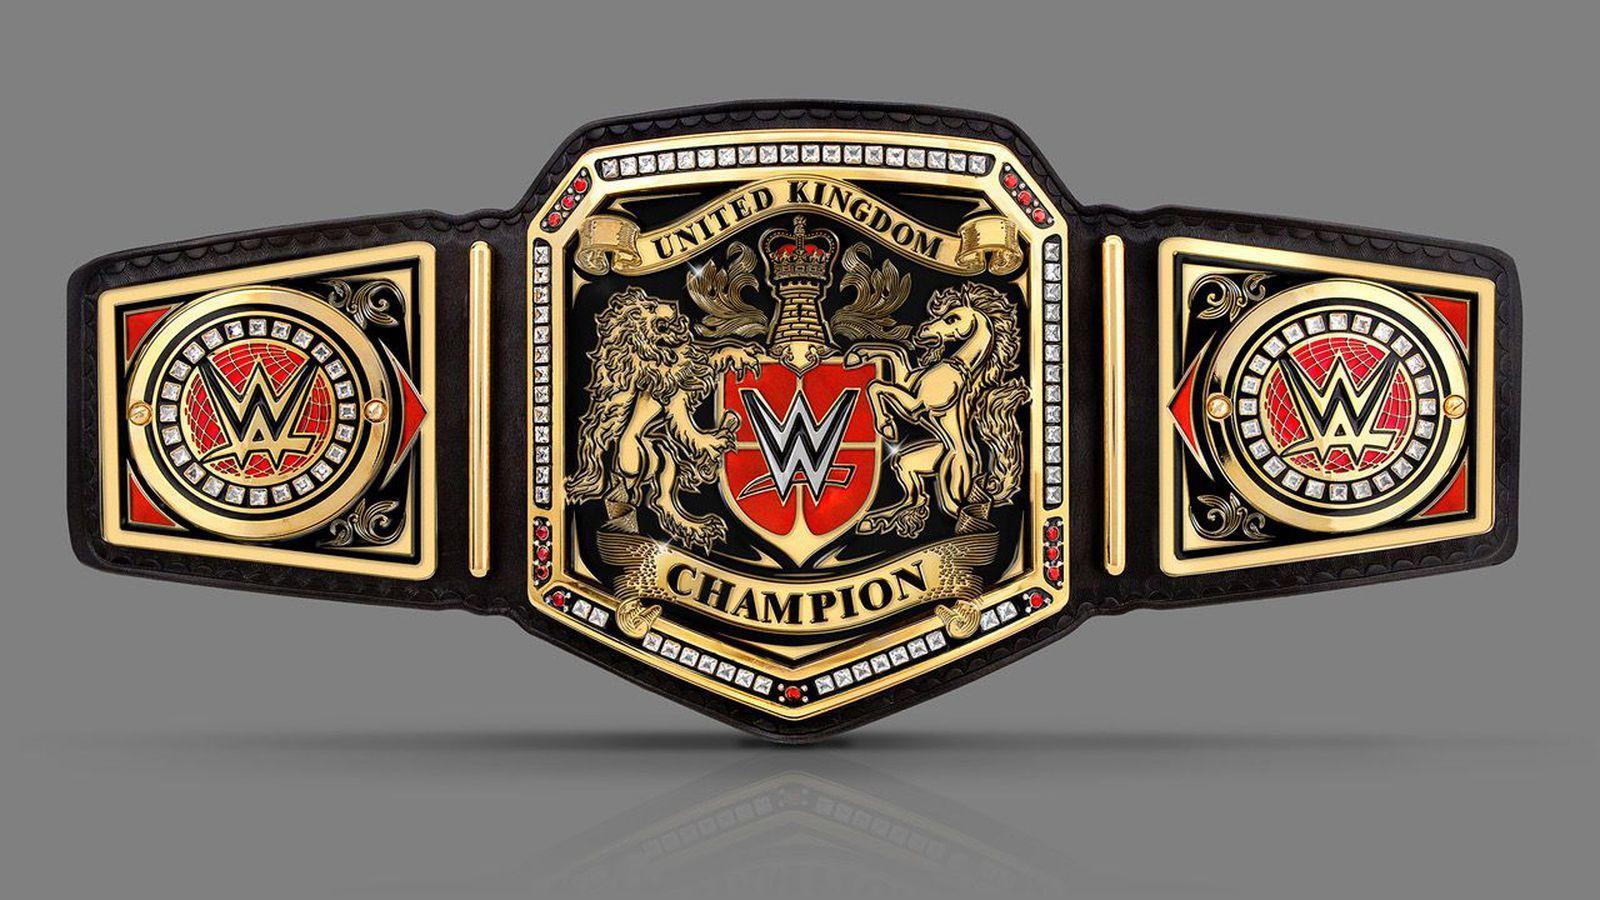 New Show for WWE UK Championship?